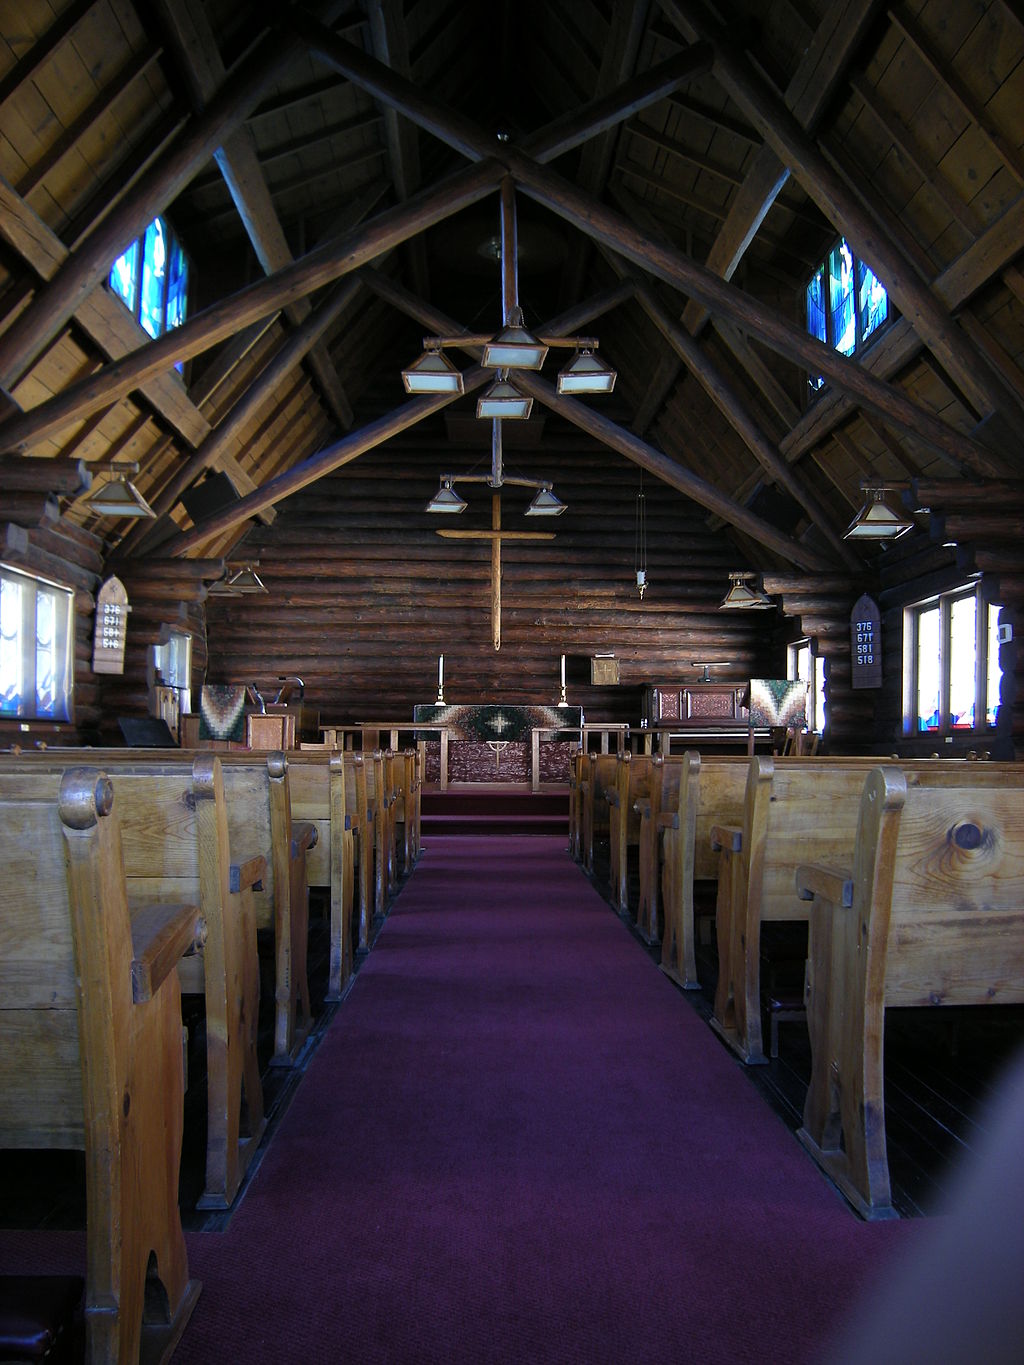 The church exterior and interior look much as it did when it was first built.